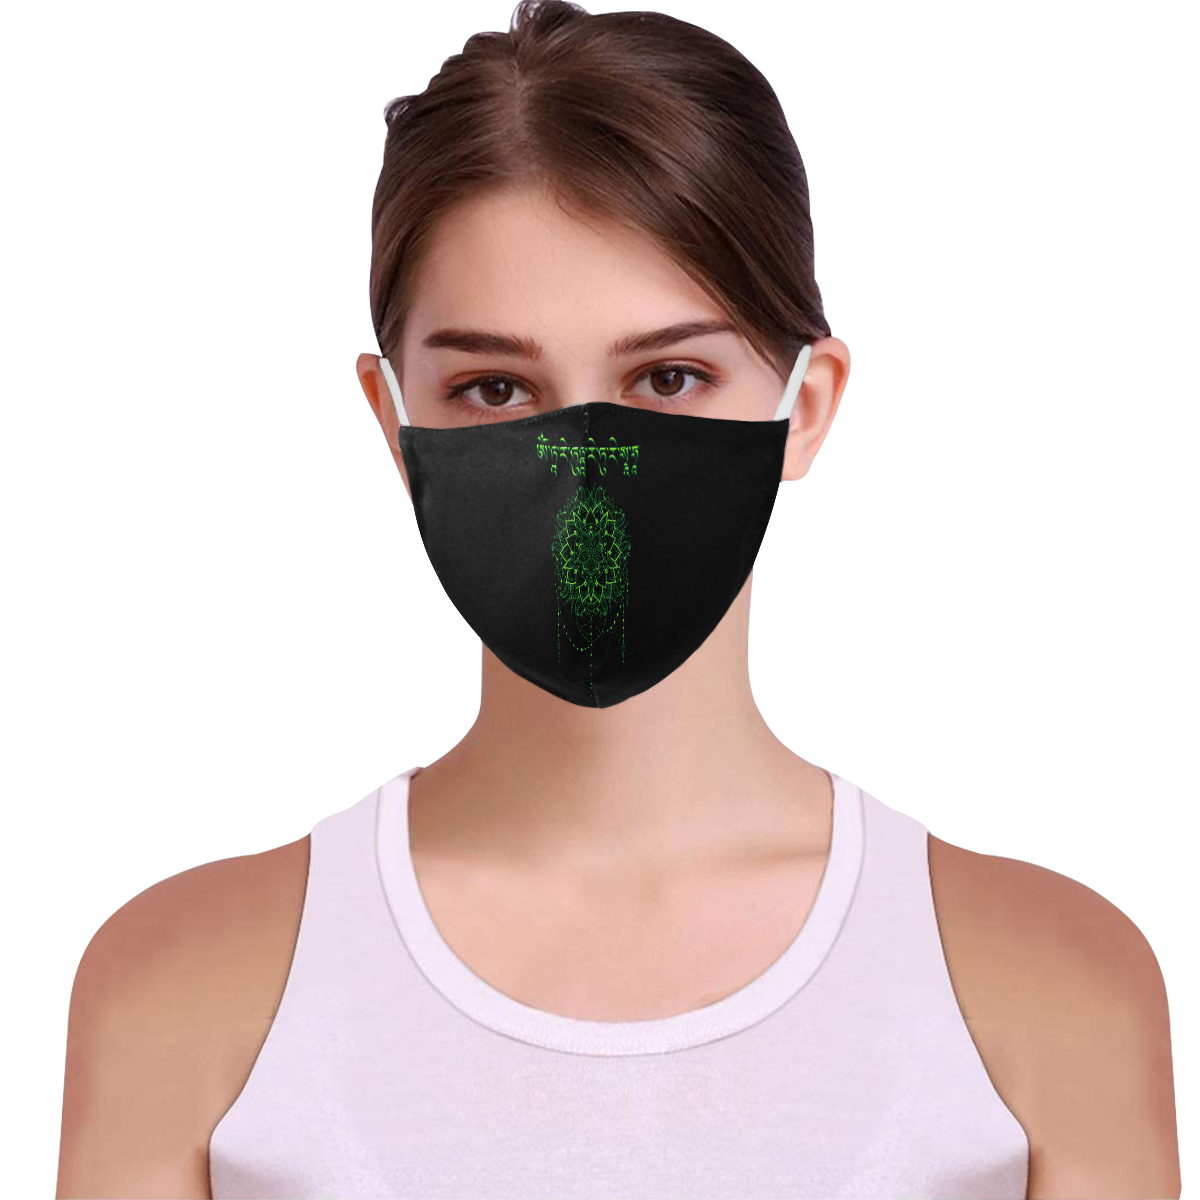 Green Tara Mantra 3D Mouth Mask with Drawstring (Pack of 10) (Model M04)